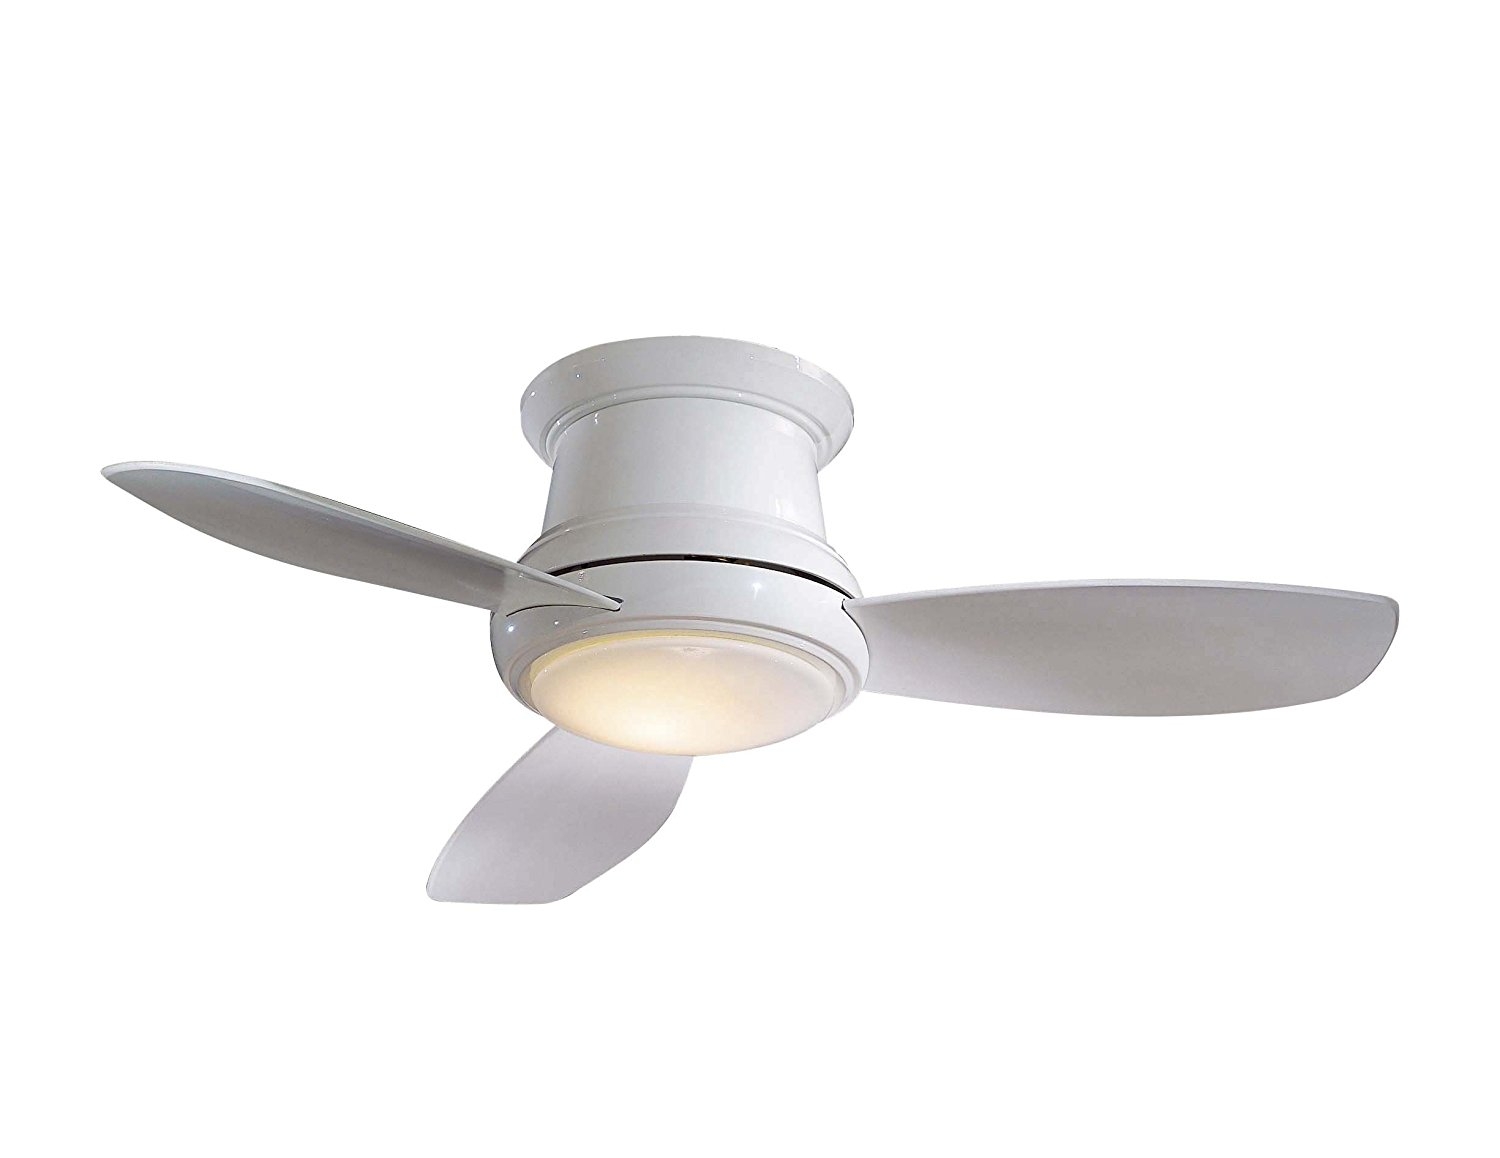 Permalink to Mini Ceiling Fan With Light